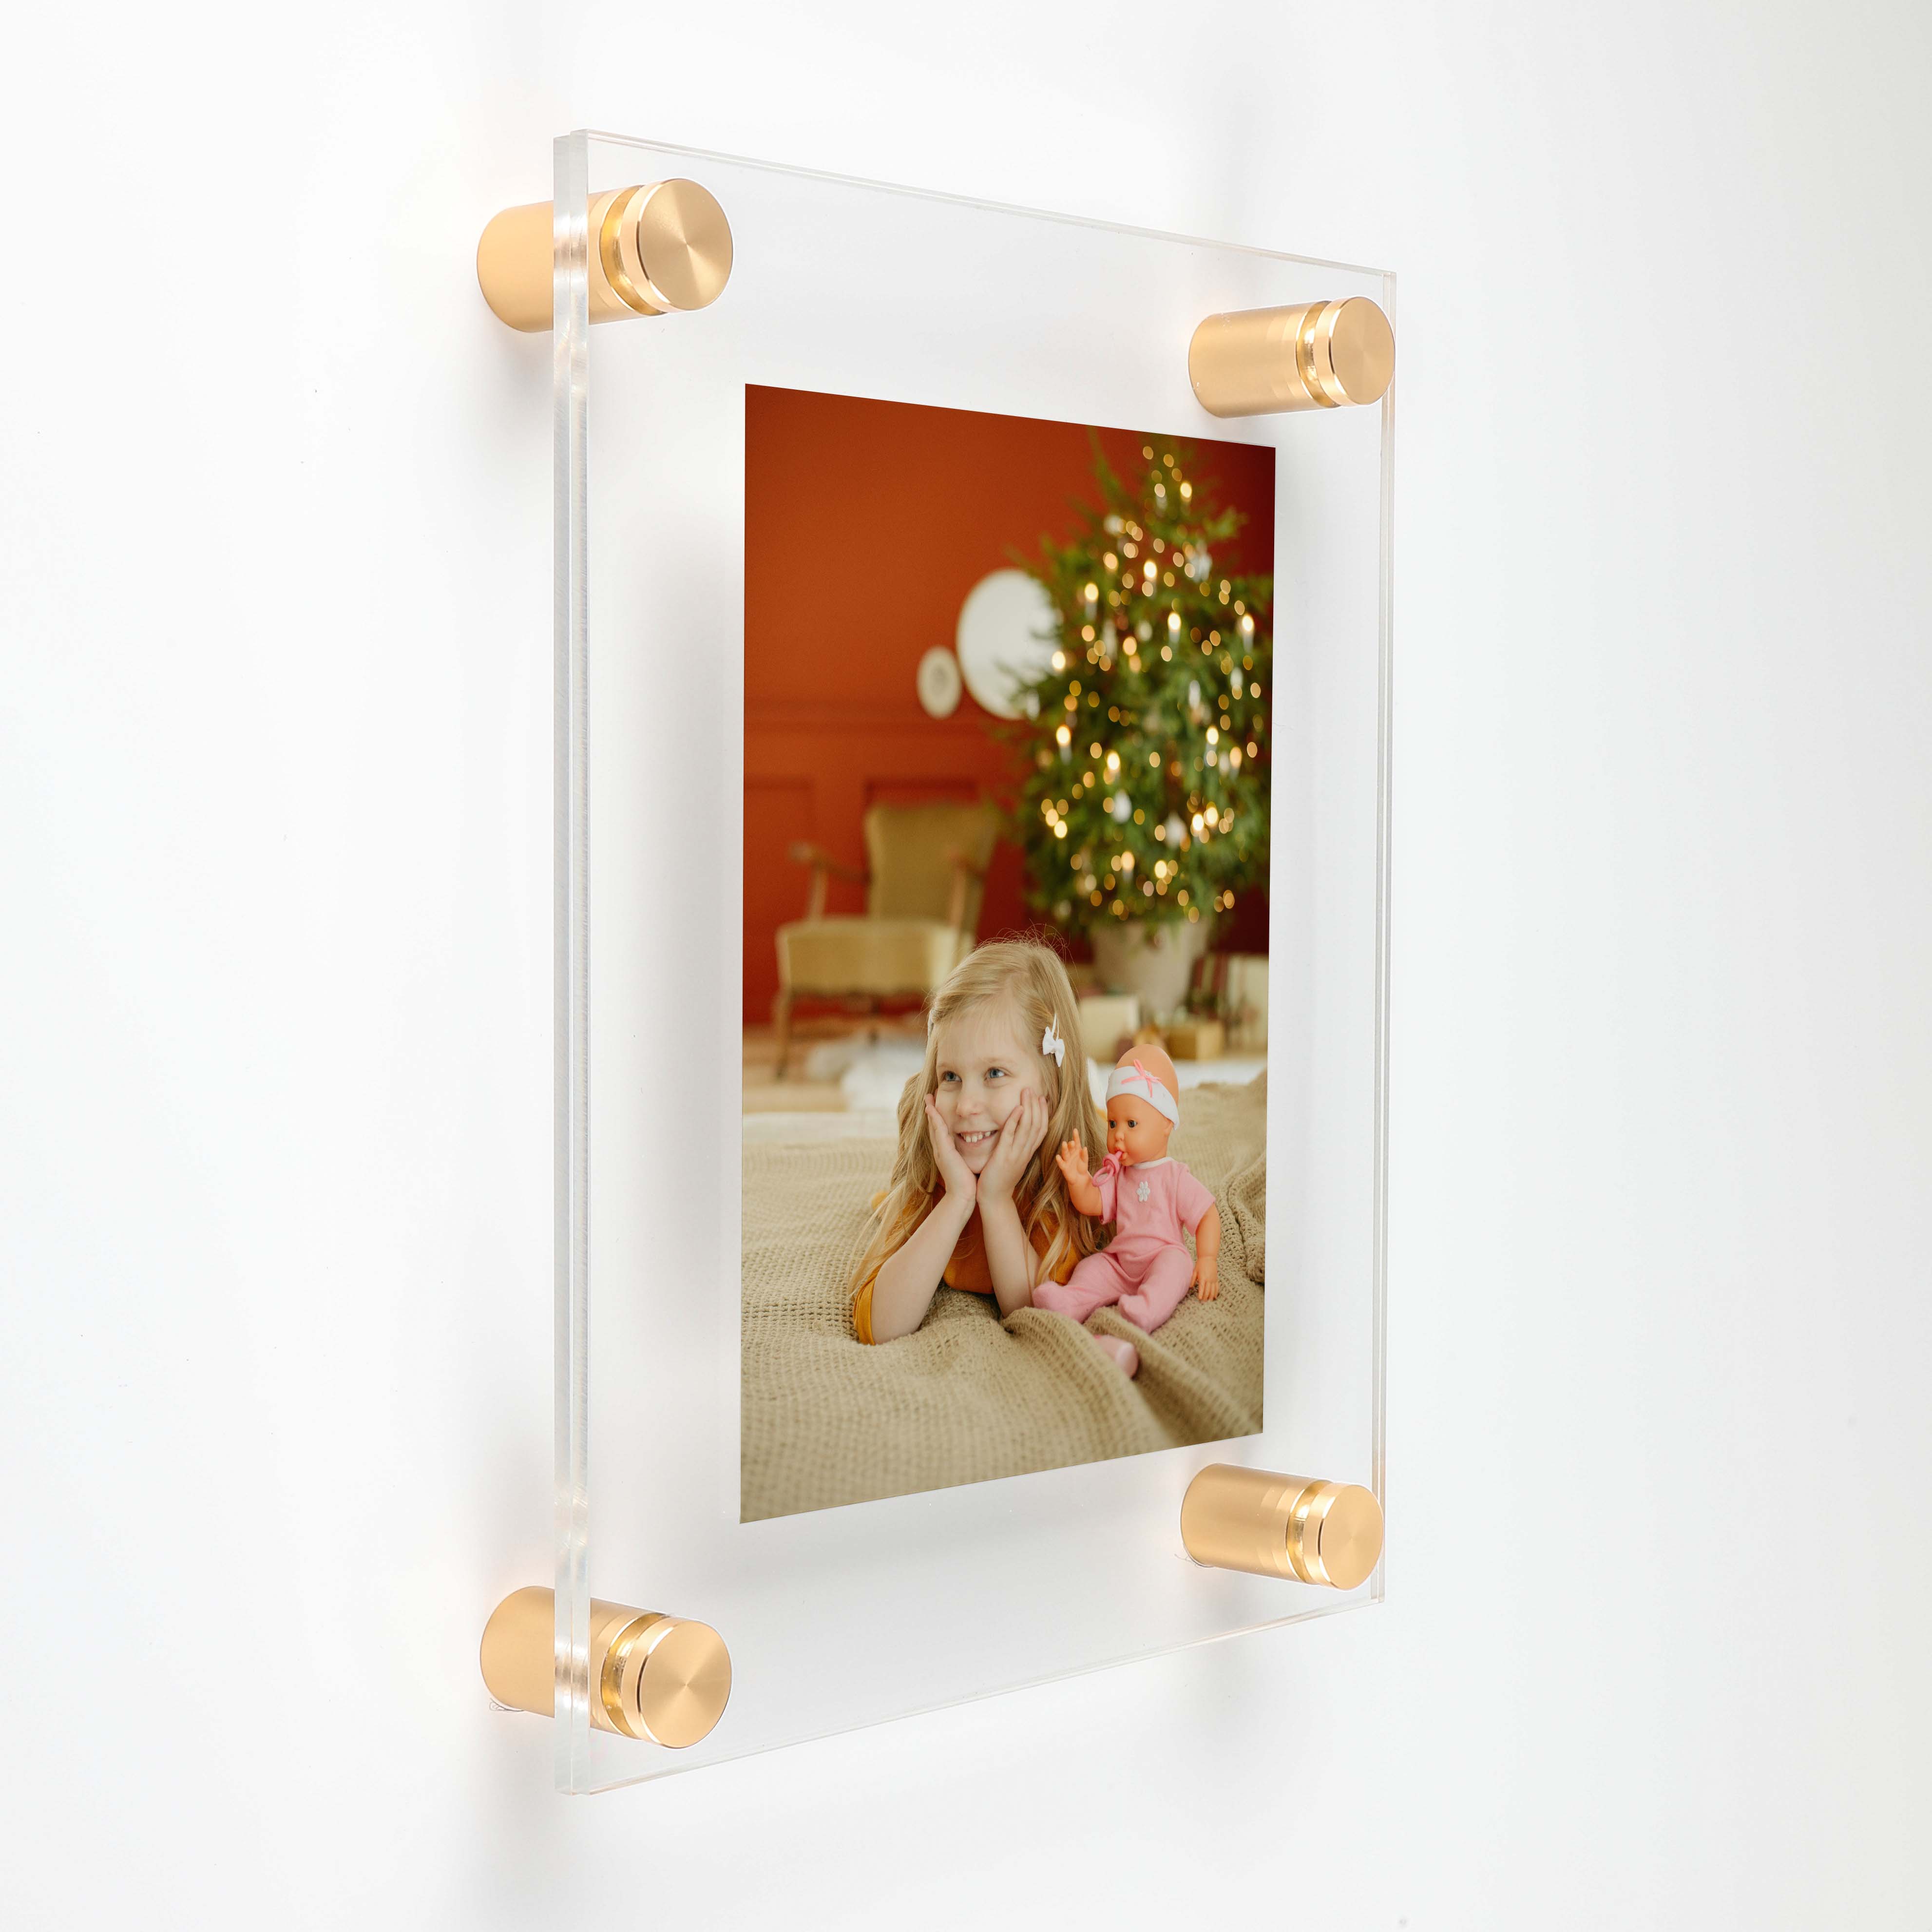 (2) 7-1/2'' x 9-1/2'' Clear Acrylics , Pre-Drilled With Polished Edges (Thick 1/8'' each), Wall Frame with (4) 5/8'' x 1/2'' Champagne Anodized Aluminum Standoffs includes Screws and Anchors